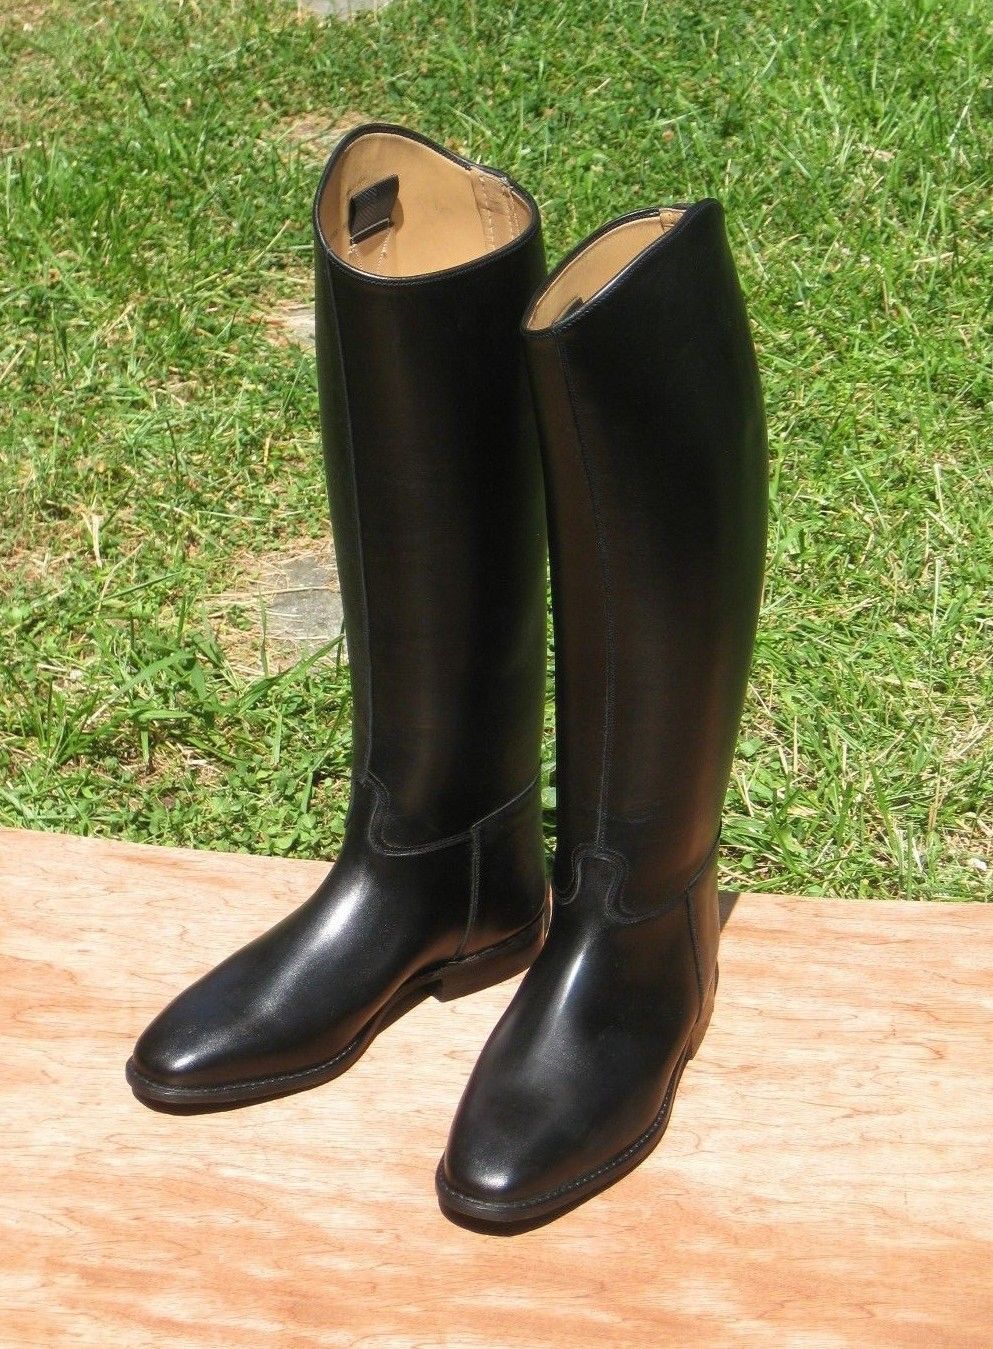 Leather Equestrian Riding Boots Leather Handmade English Dressage Custom Boots